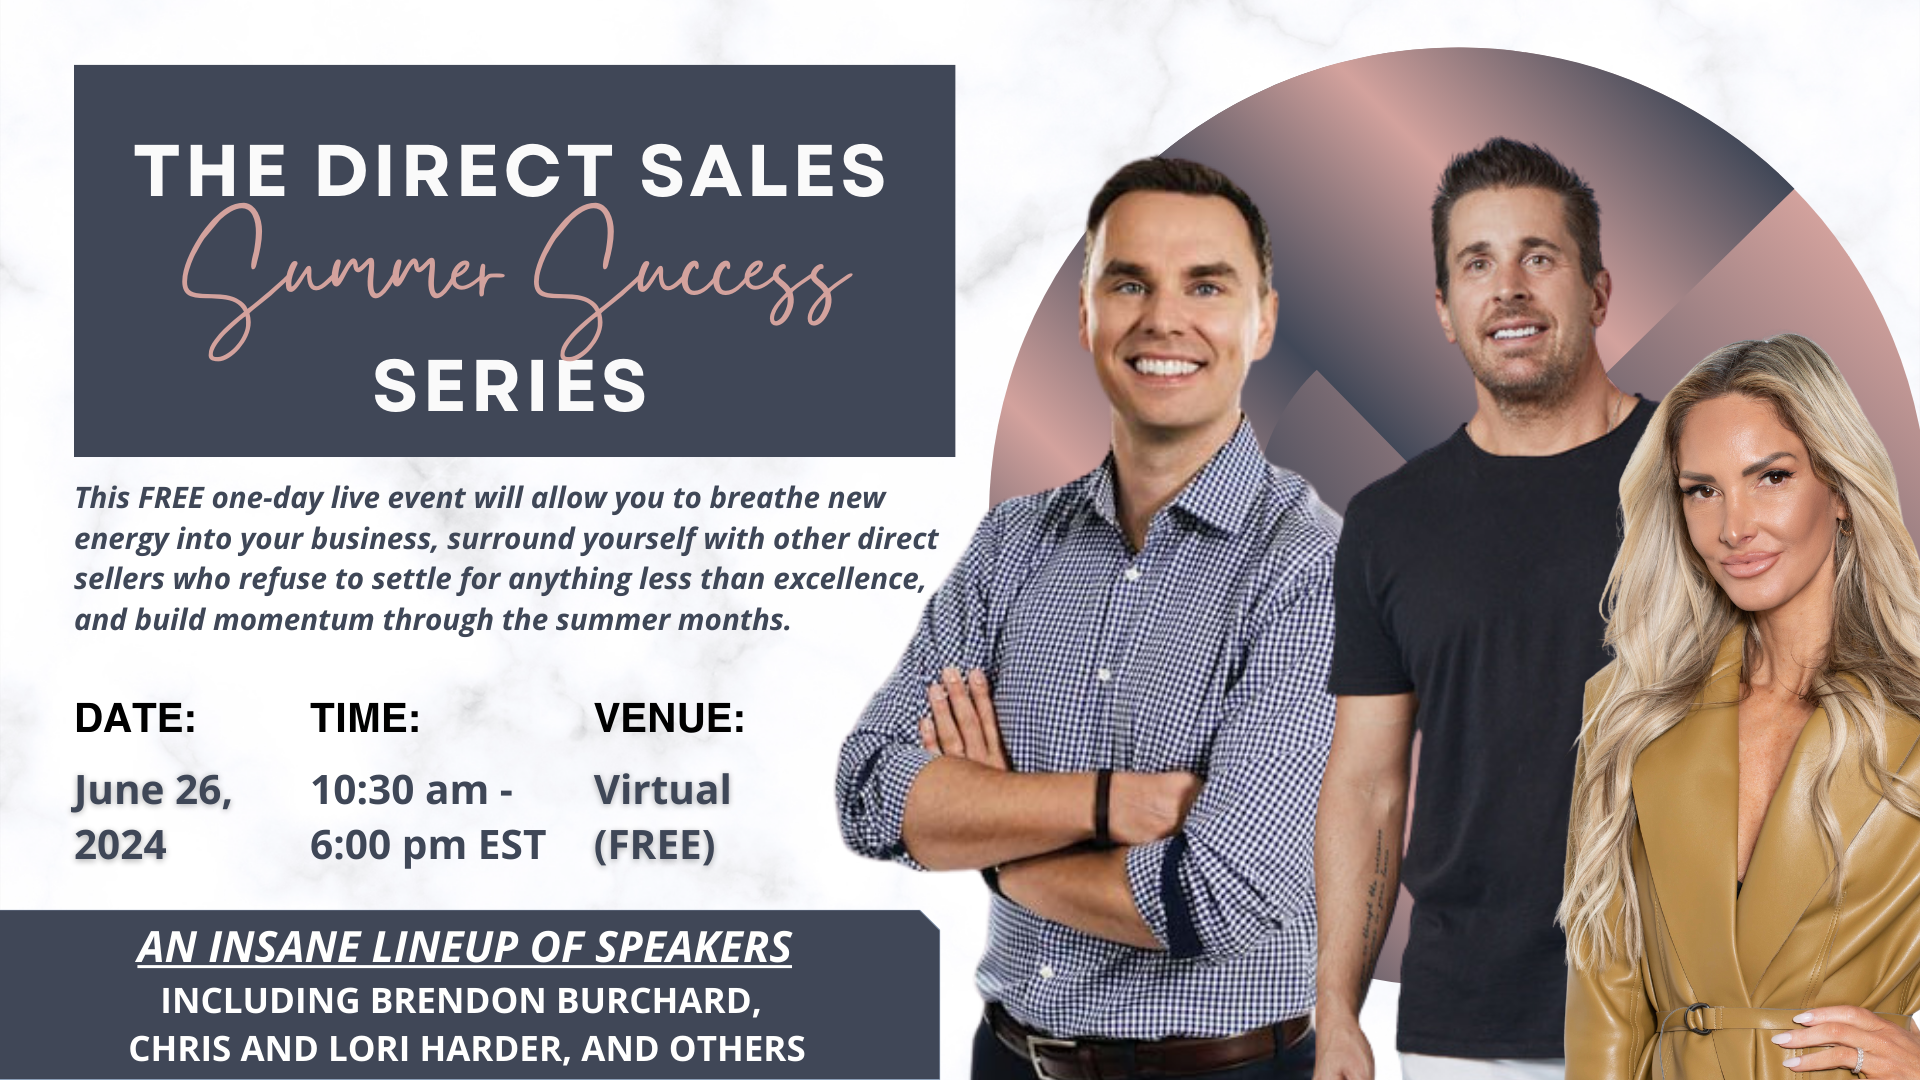 A FREE One-Day Virtual Event for direct sellers who want to get inspired, gain clarity, and learn simple strategies to make this a summer of monumental growth and success.